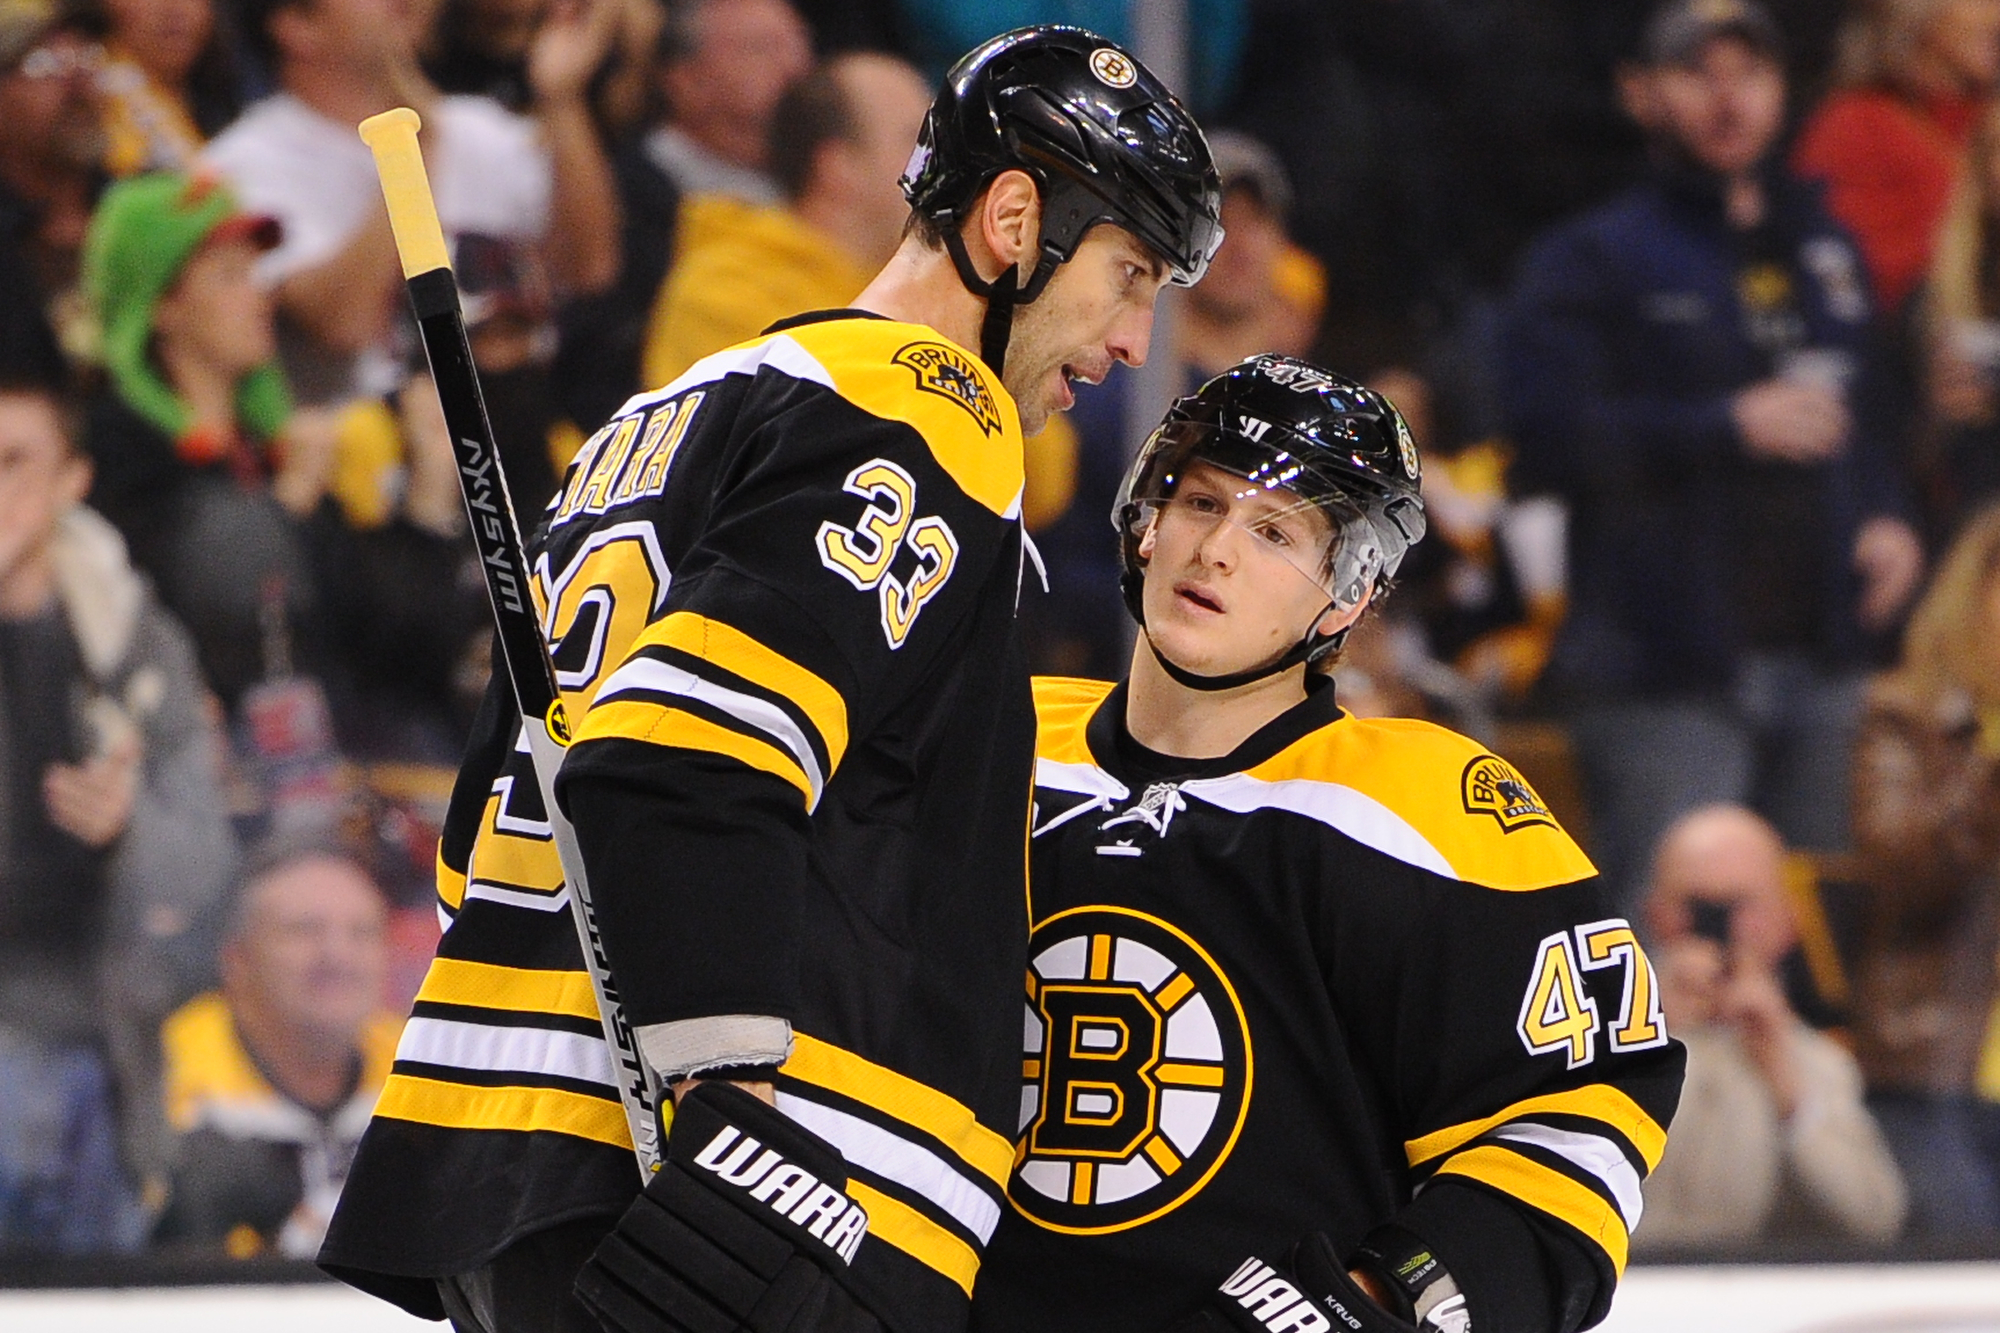 Beyond The Hit: Bruins' Krug takes pride in his overall game